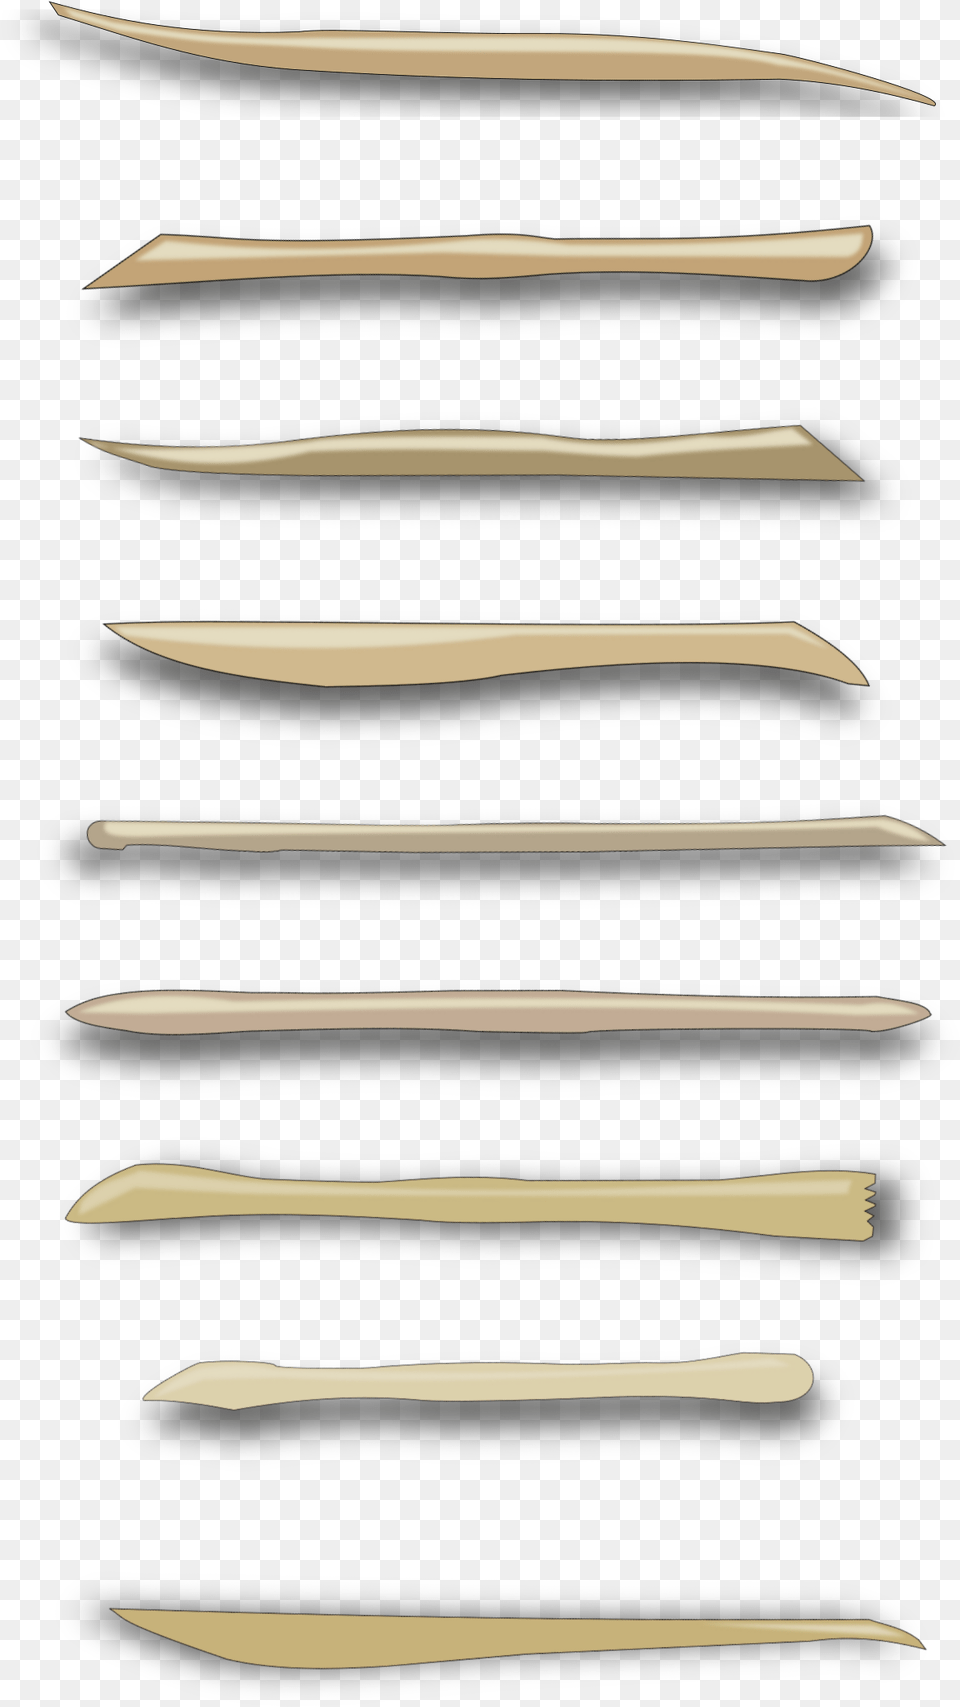 Clay Modelling Tools Clip Arts Modelling Clay Tools, Cutlery, Weapon, Sword, Brush Free Png Download